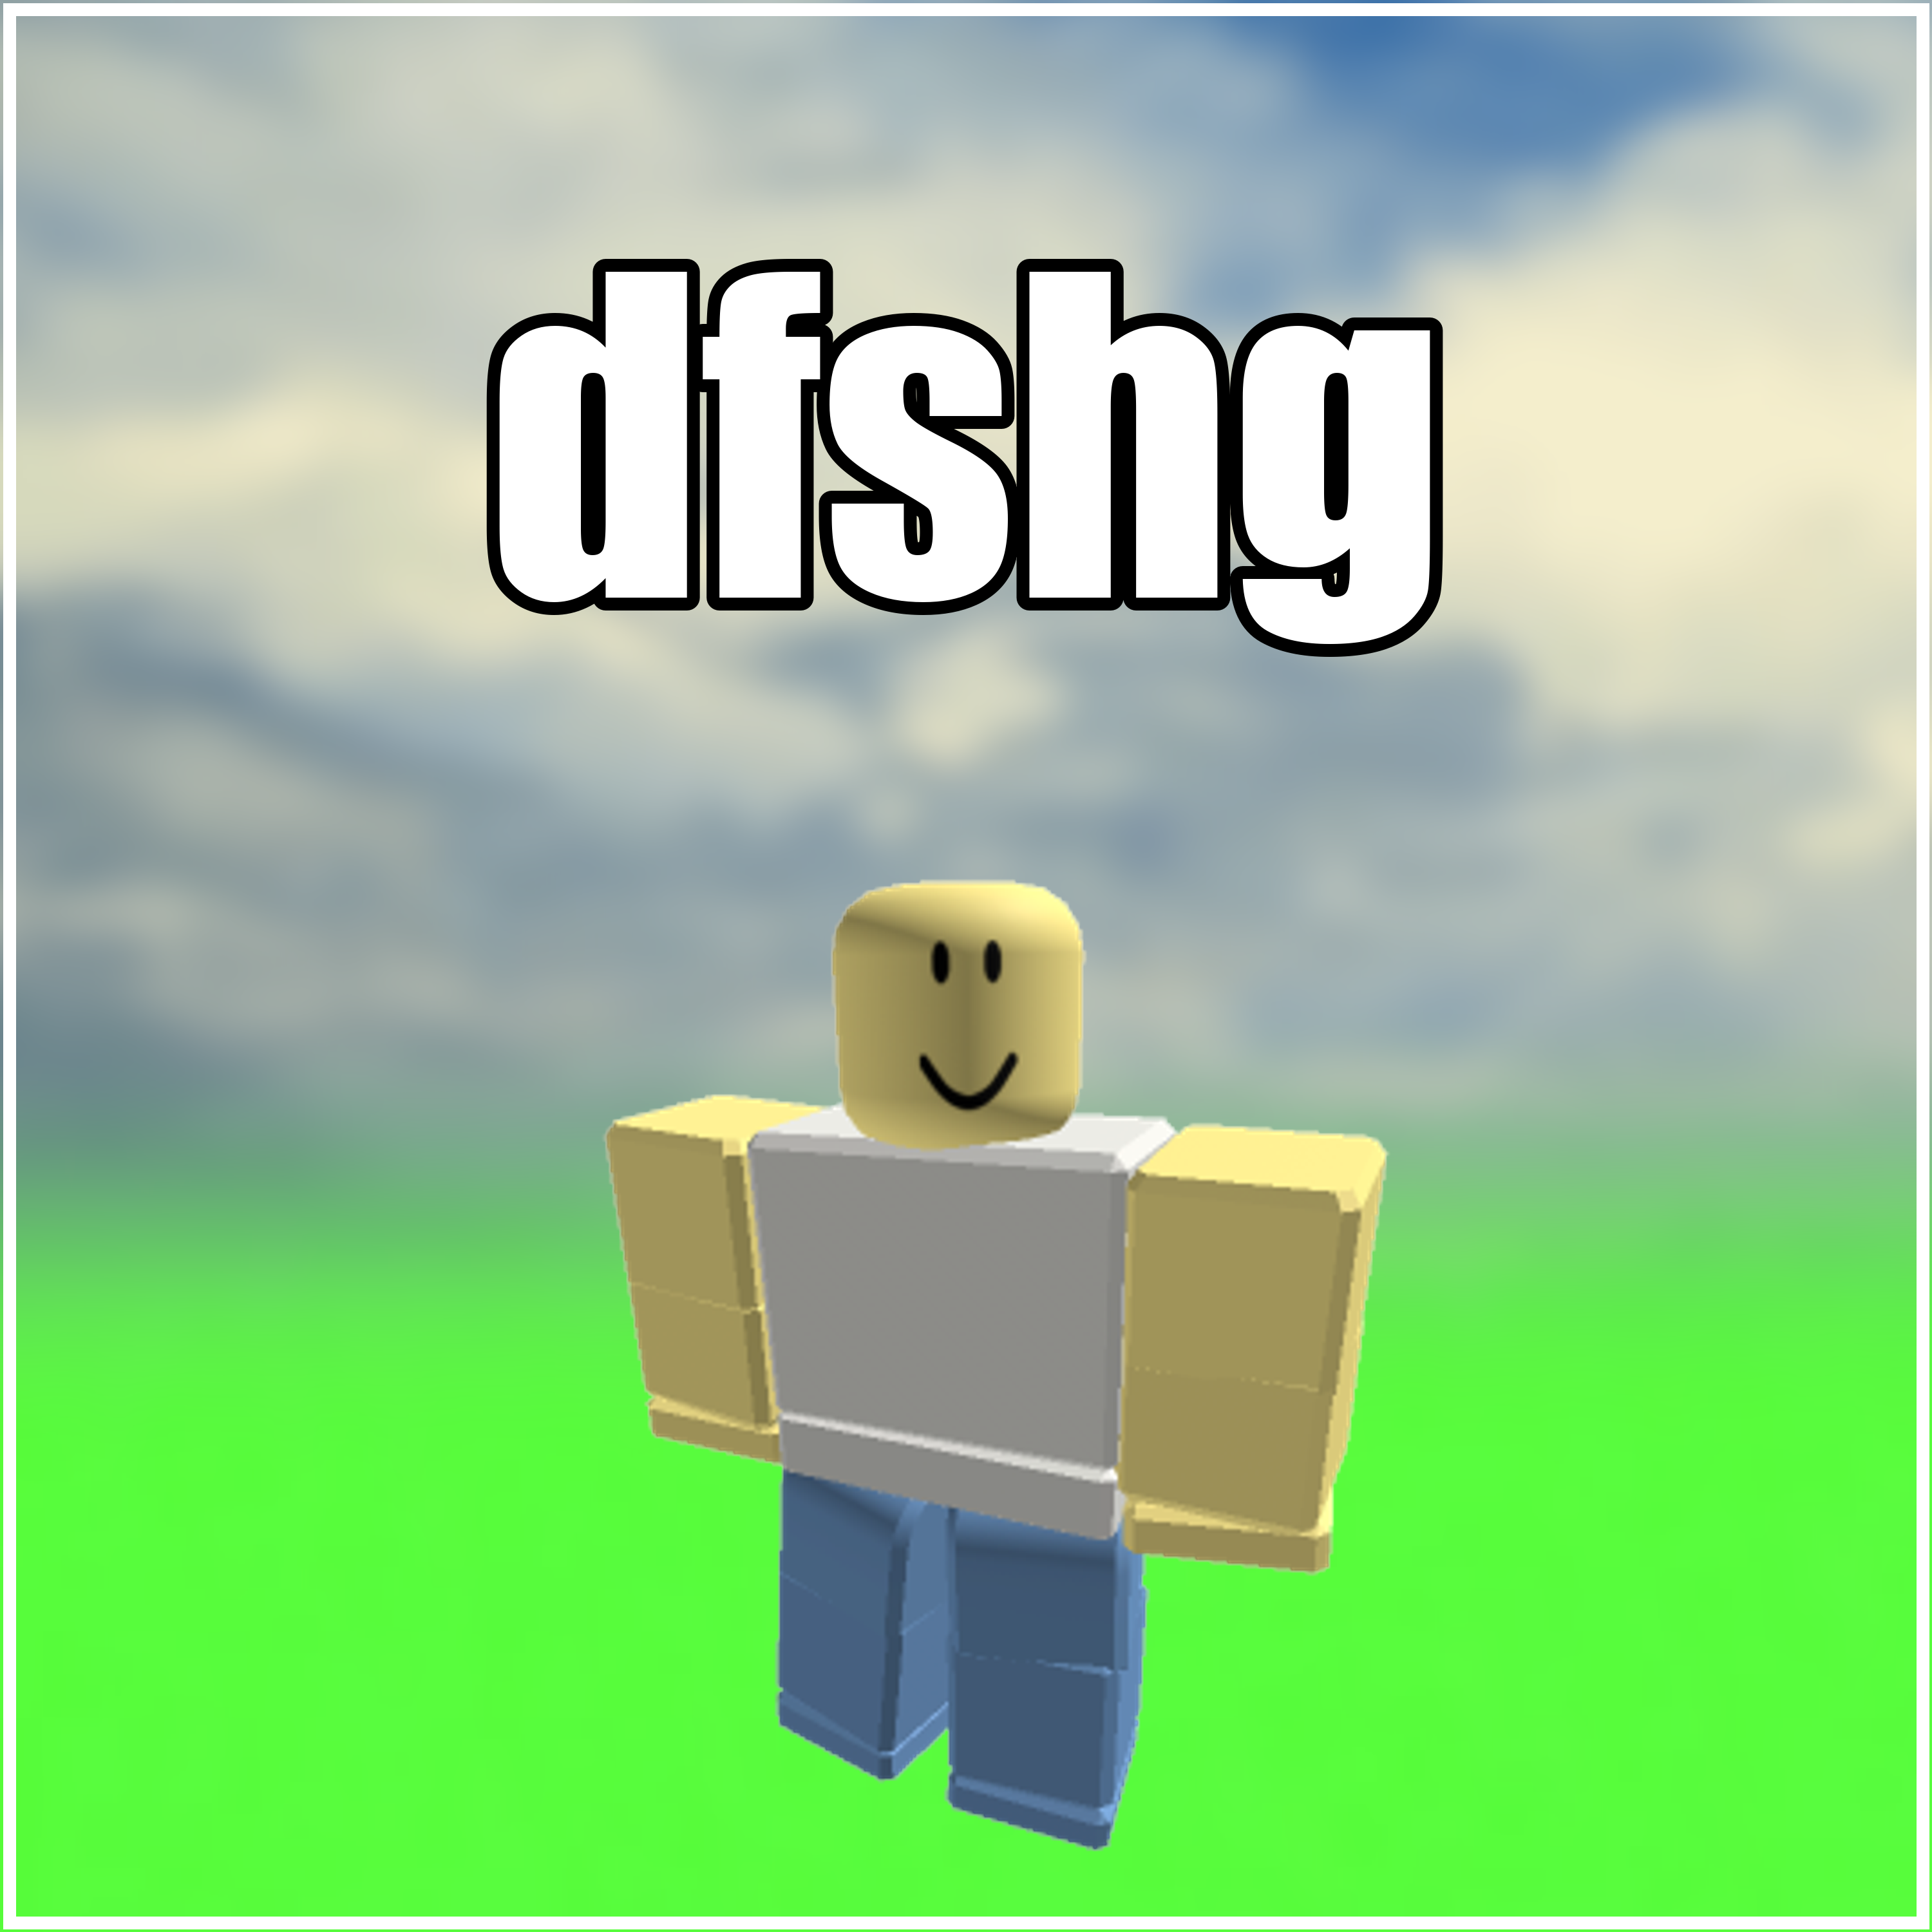 robruh RARE username "dfshg" ROBLOX account guaranteed to be unverified!